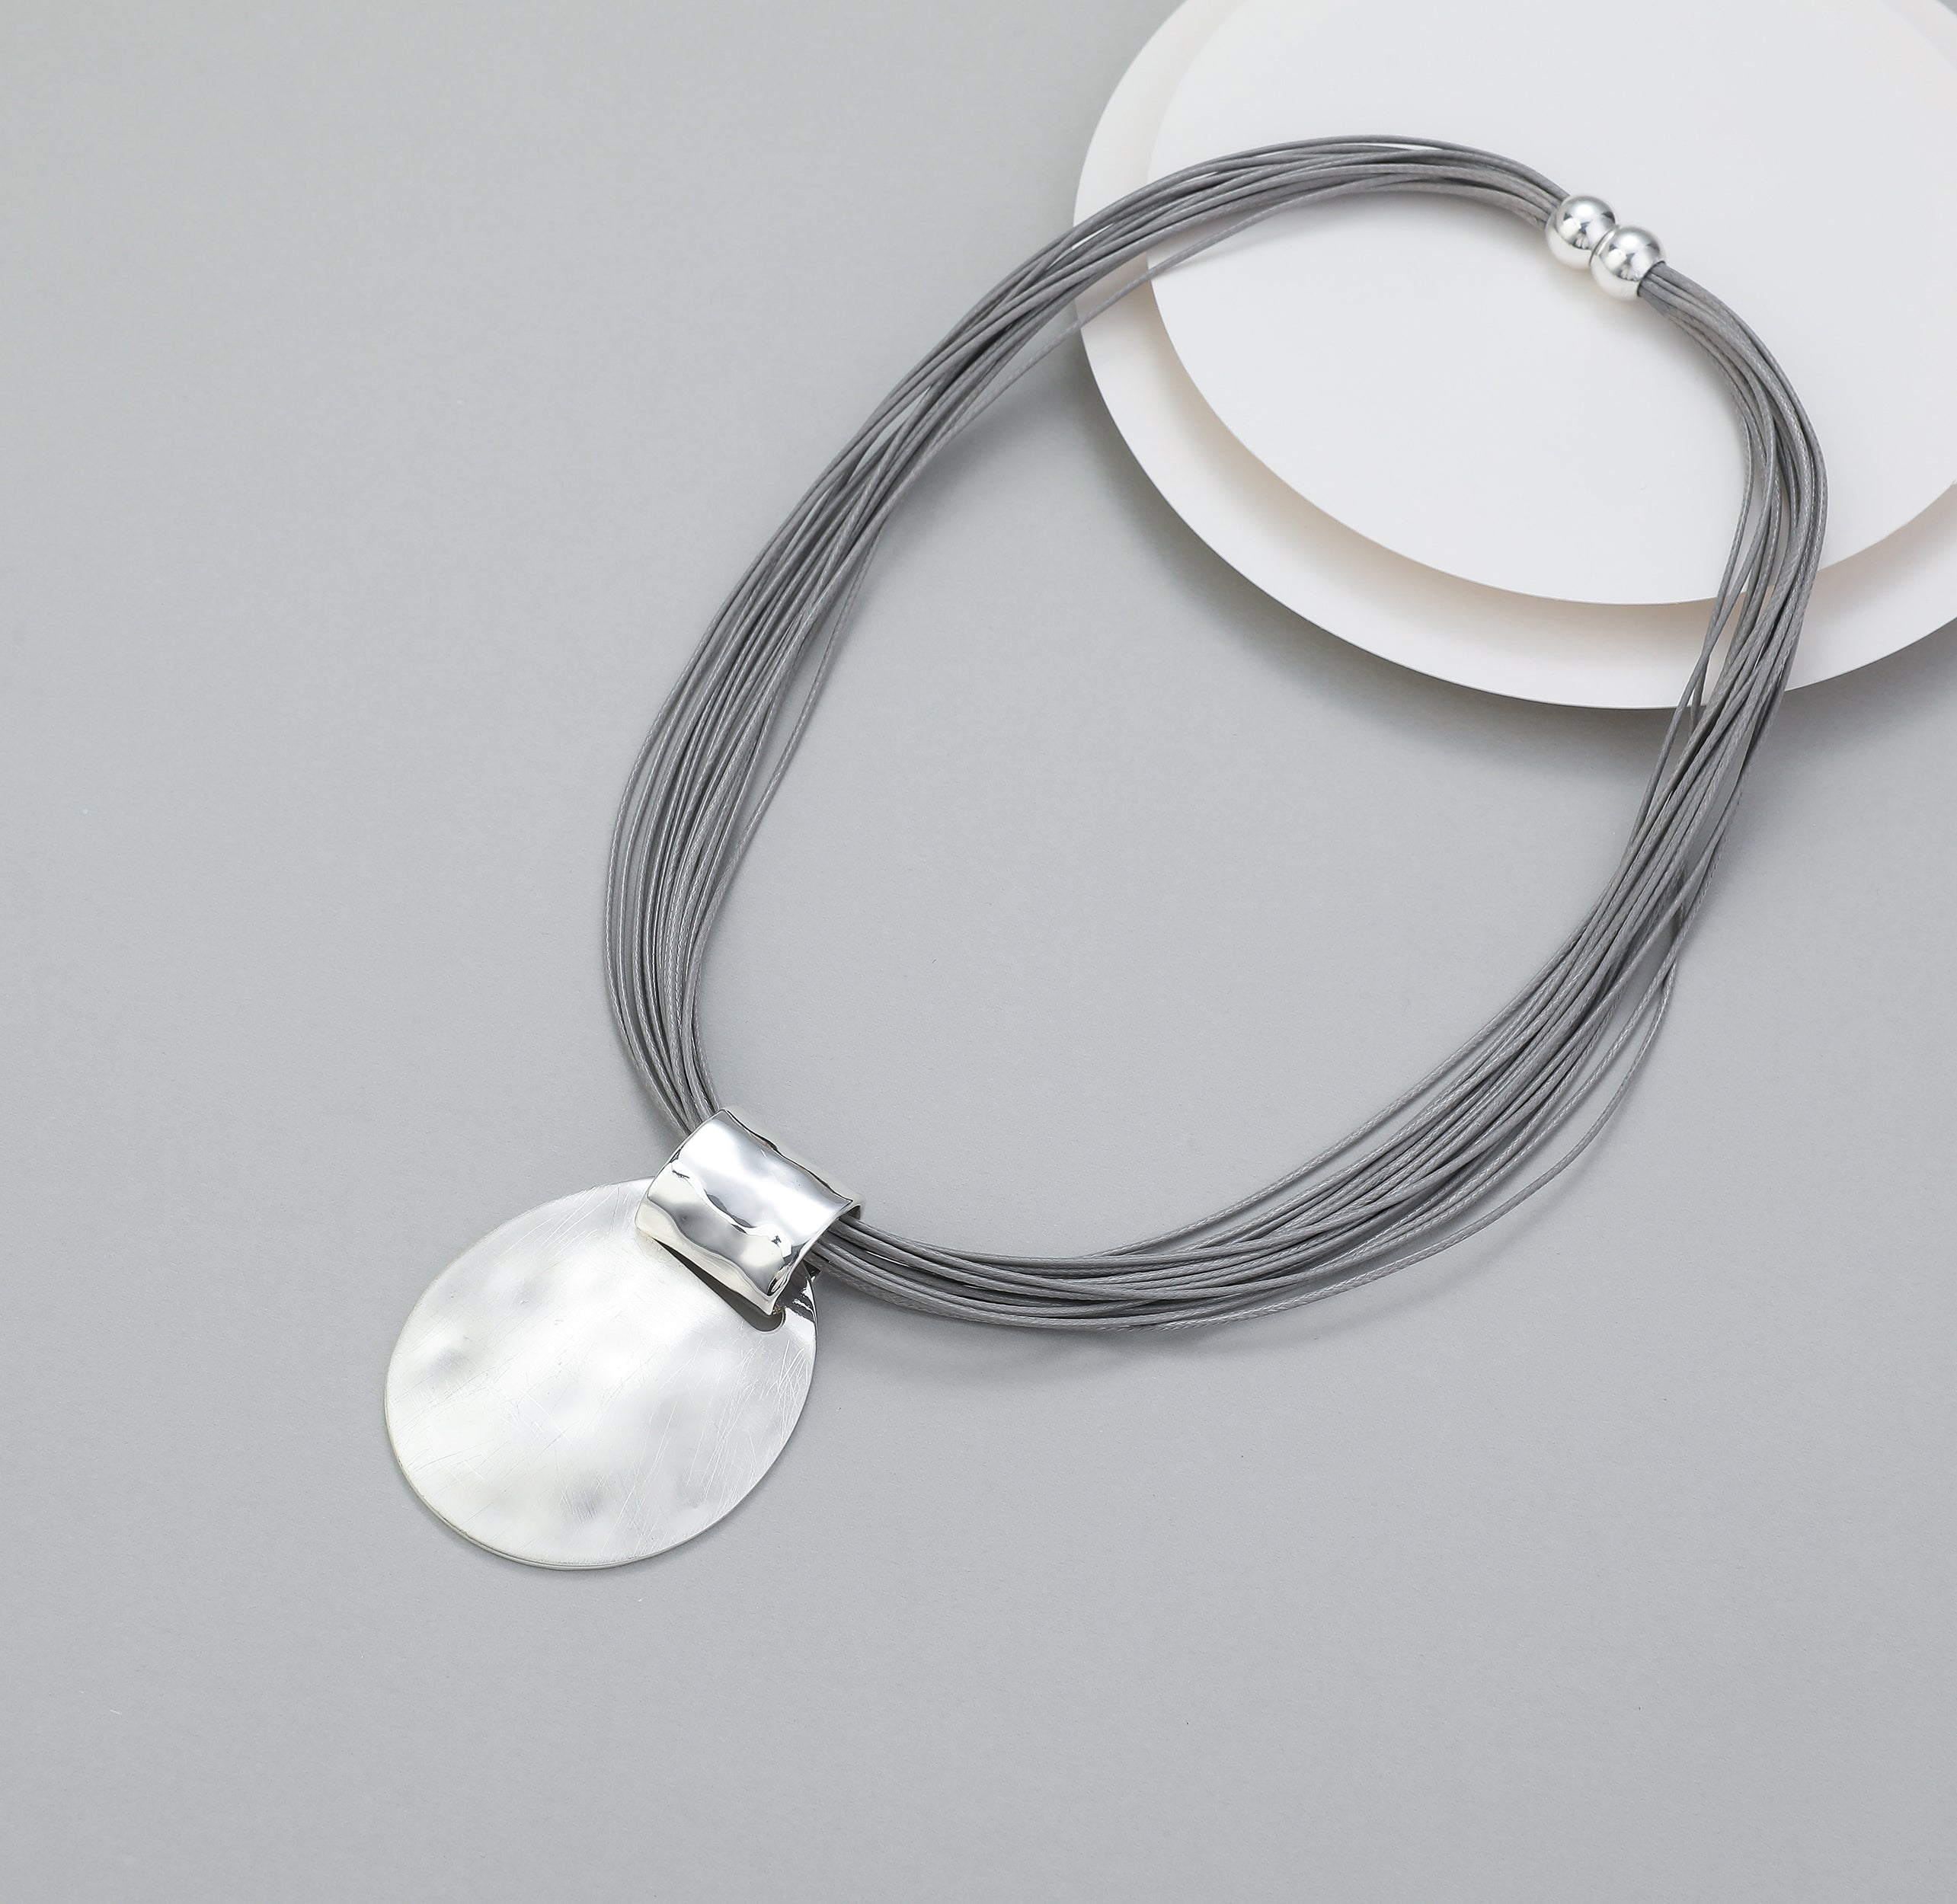 Short magnetic necklace with shiny silver connector and matte silver oval pendant